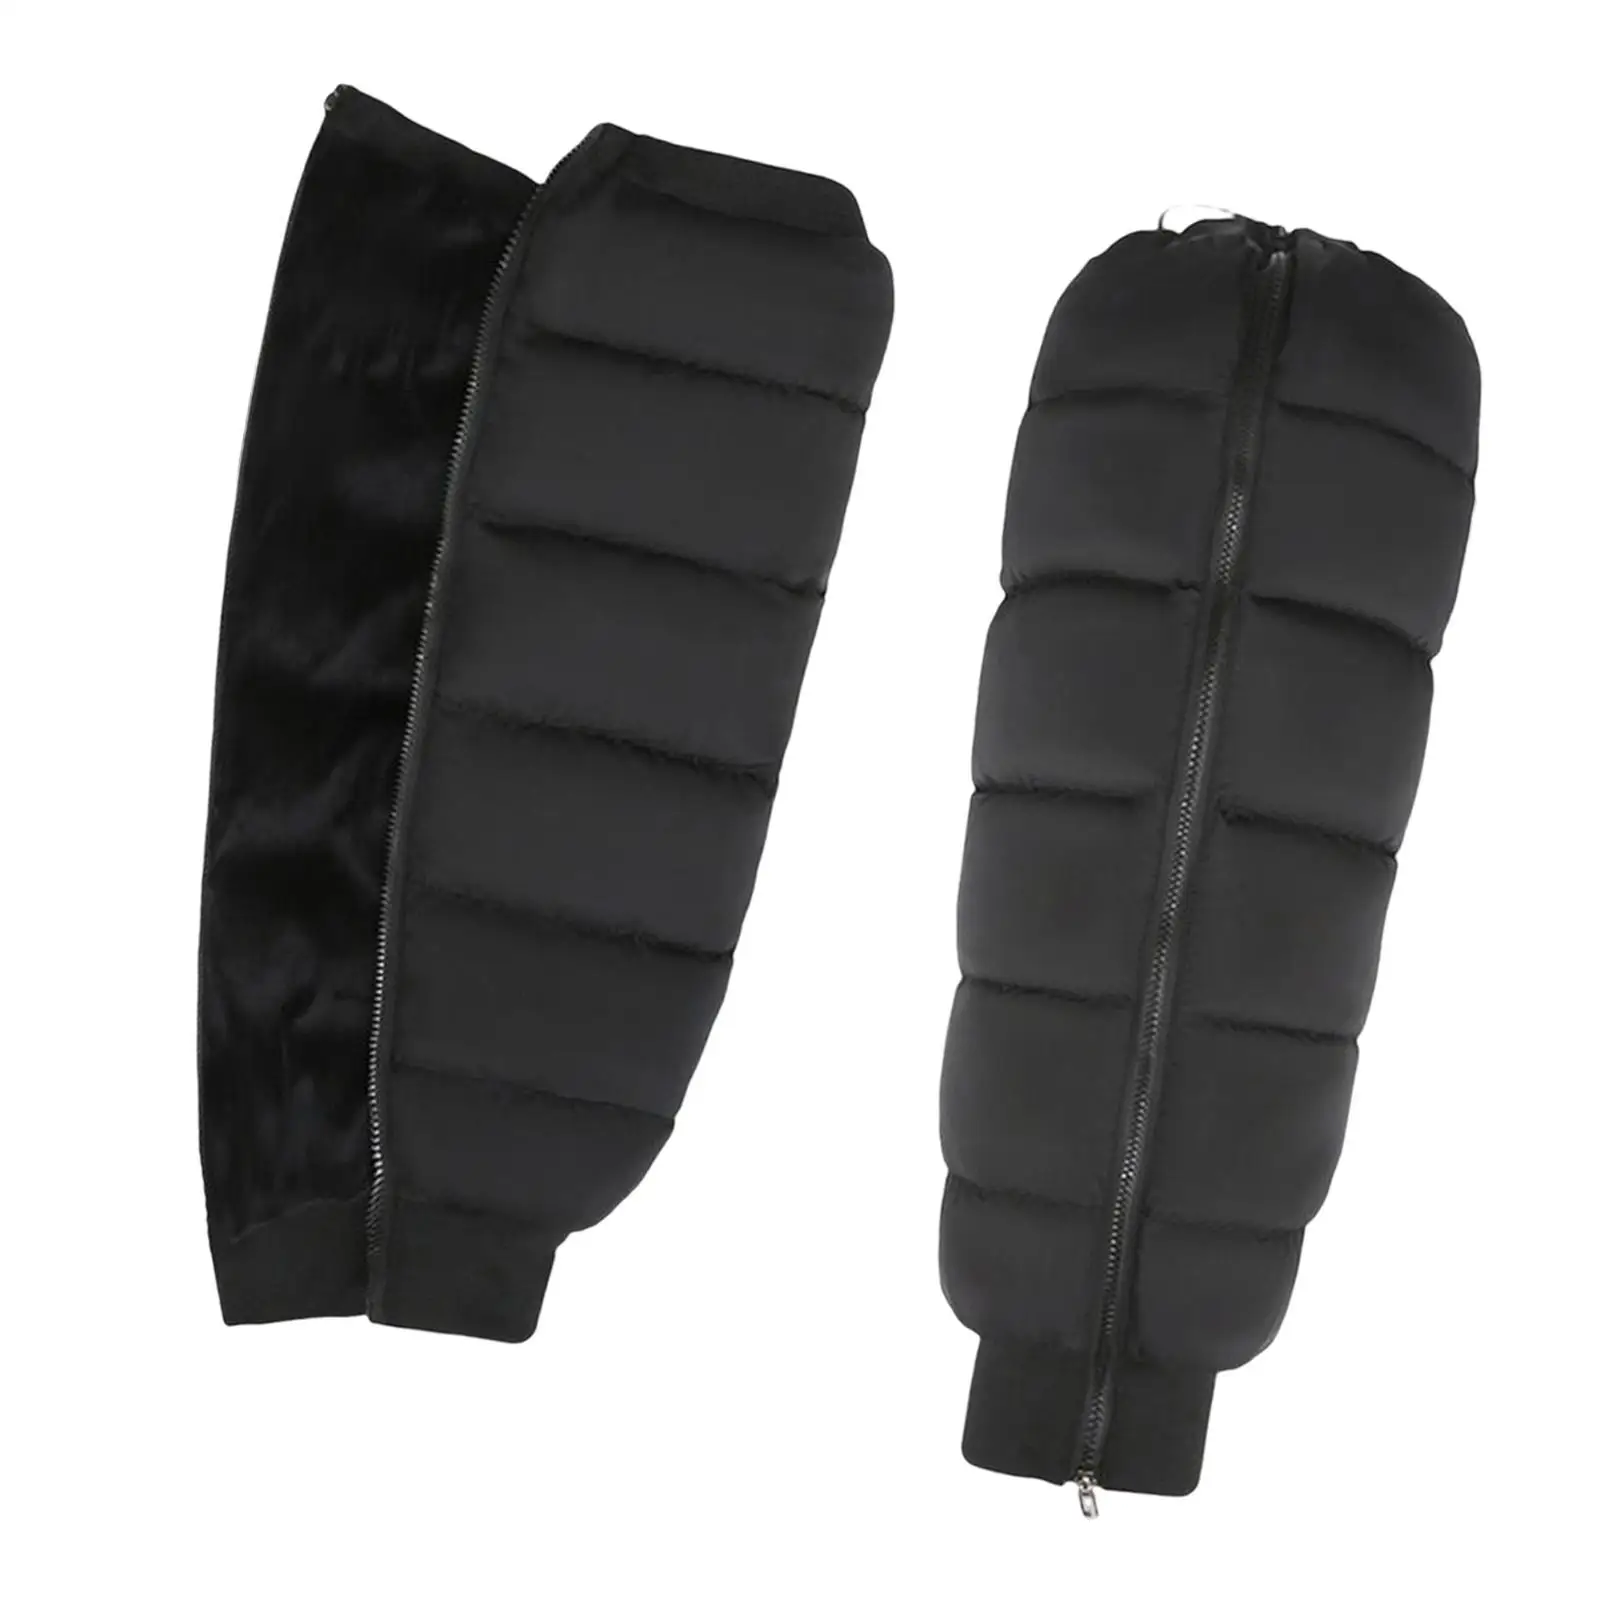 1 Pair Winter Cycling Knee Pads Protective Gear Black Warmer Windproof Men and Women Leg Sleeve for Cold Winter Riding Skiing